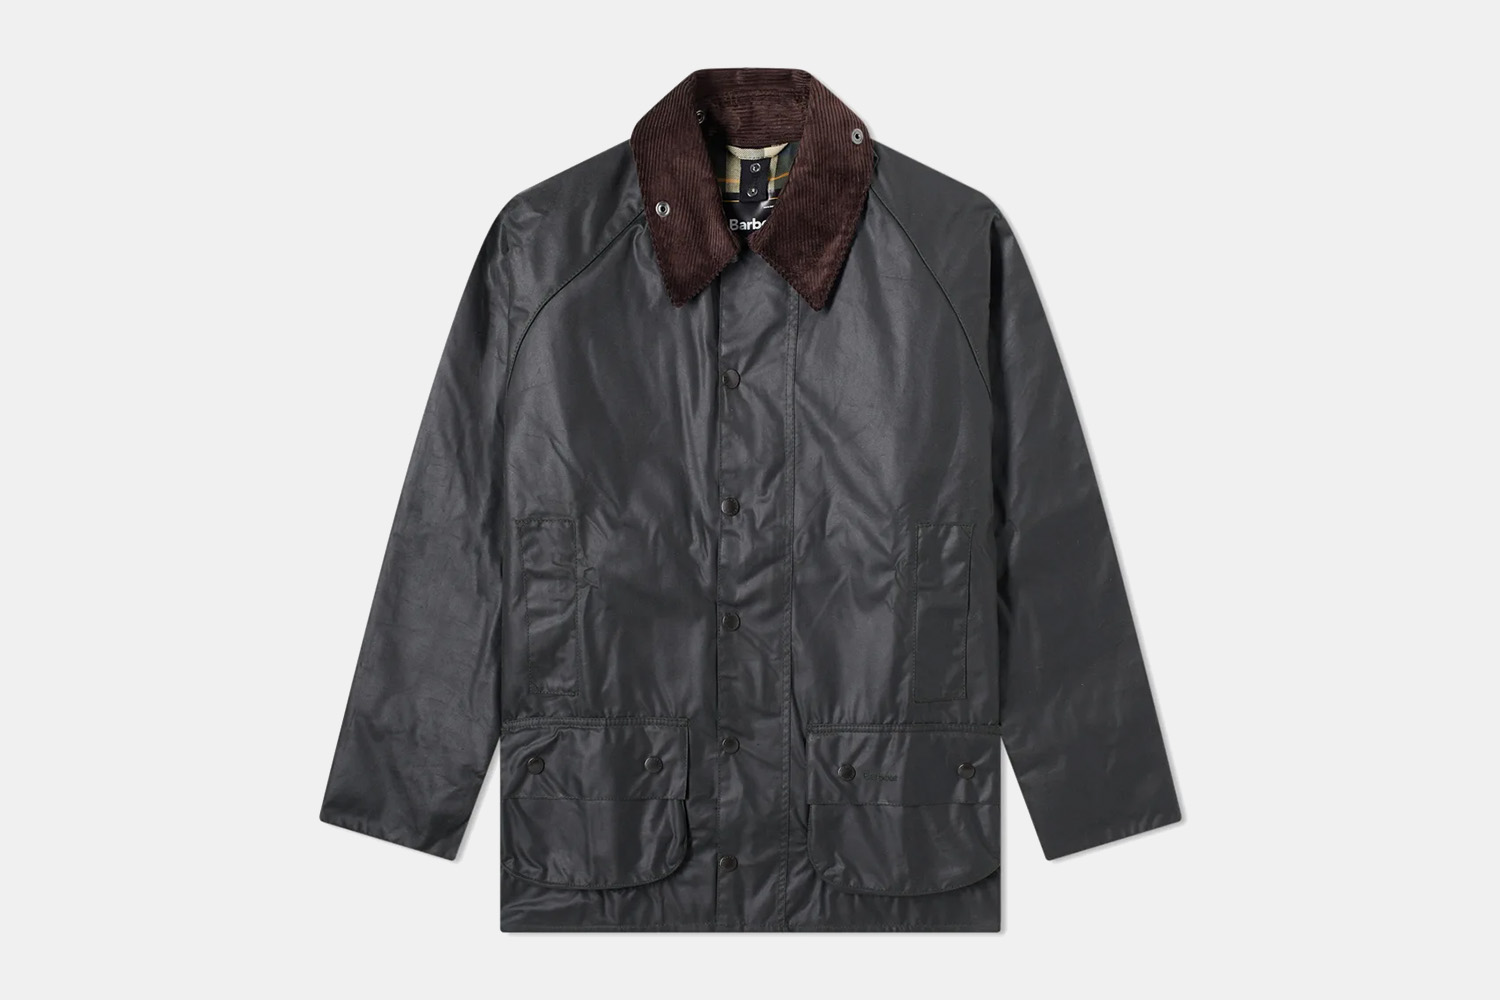 Deal: The Barbour Beaufort Is Only $179 at End Clothing